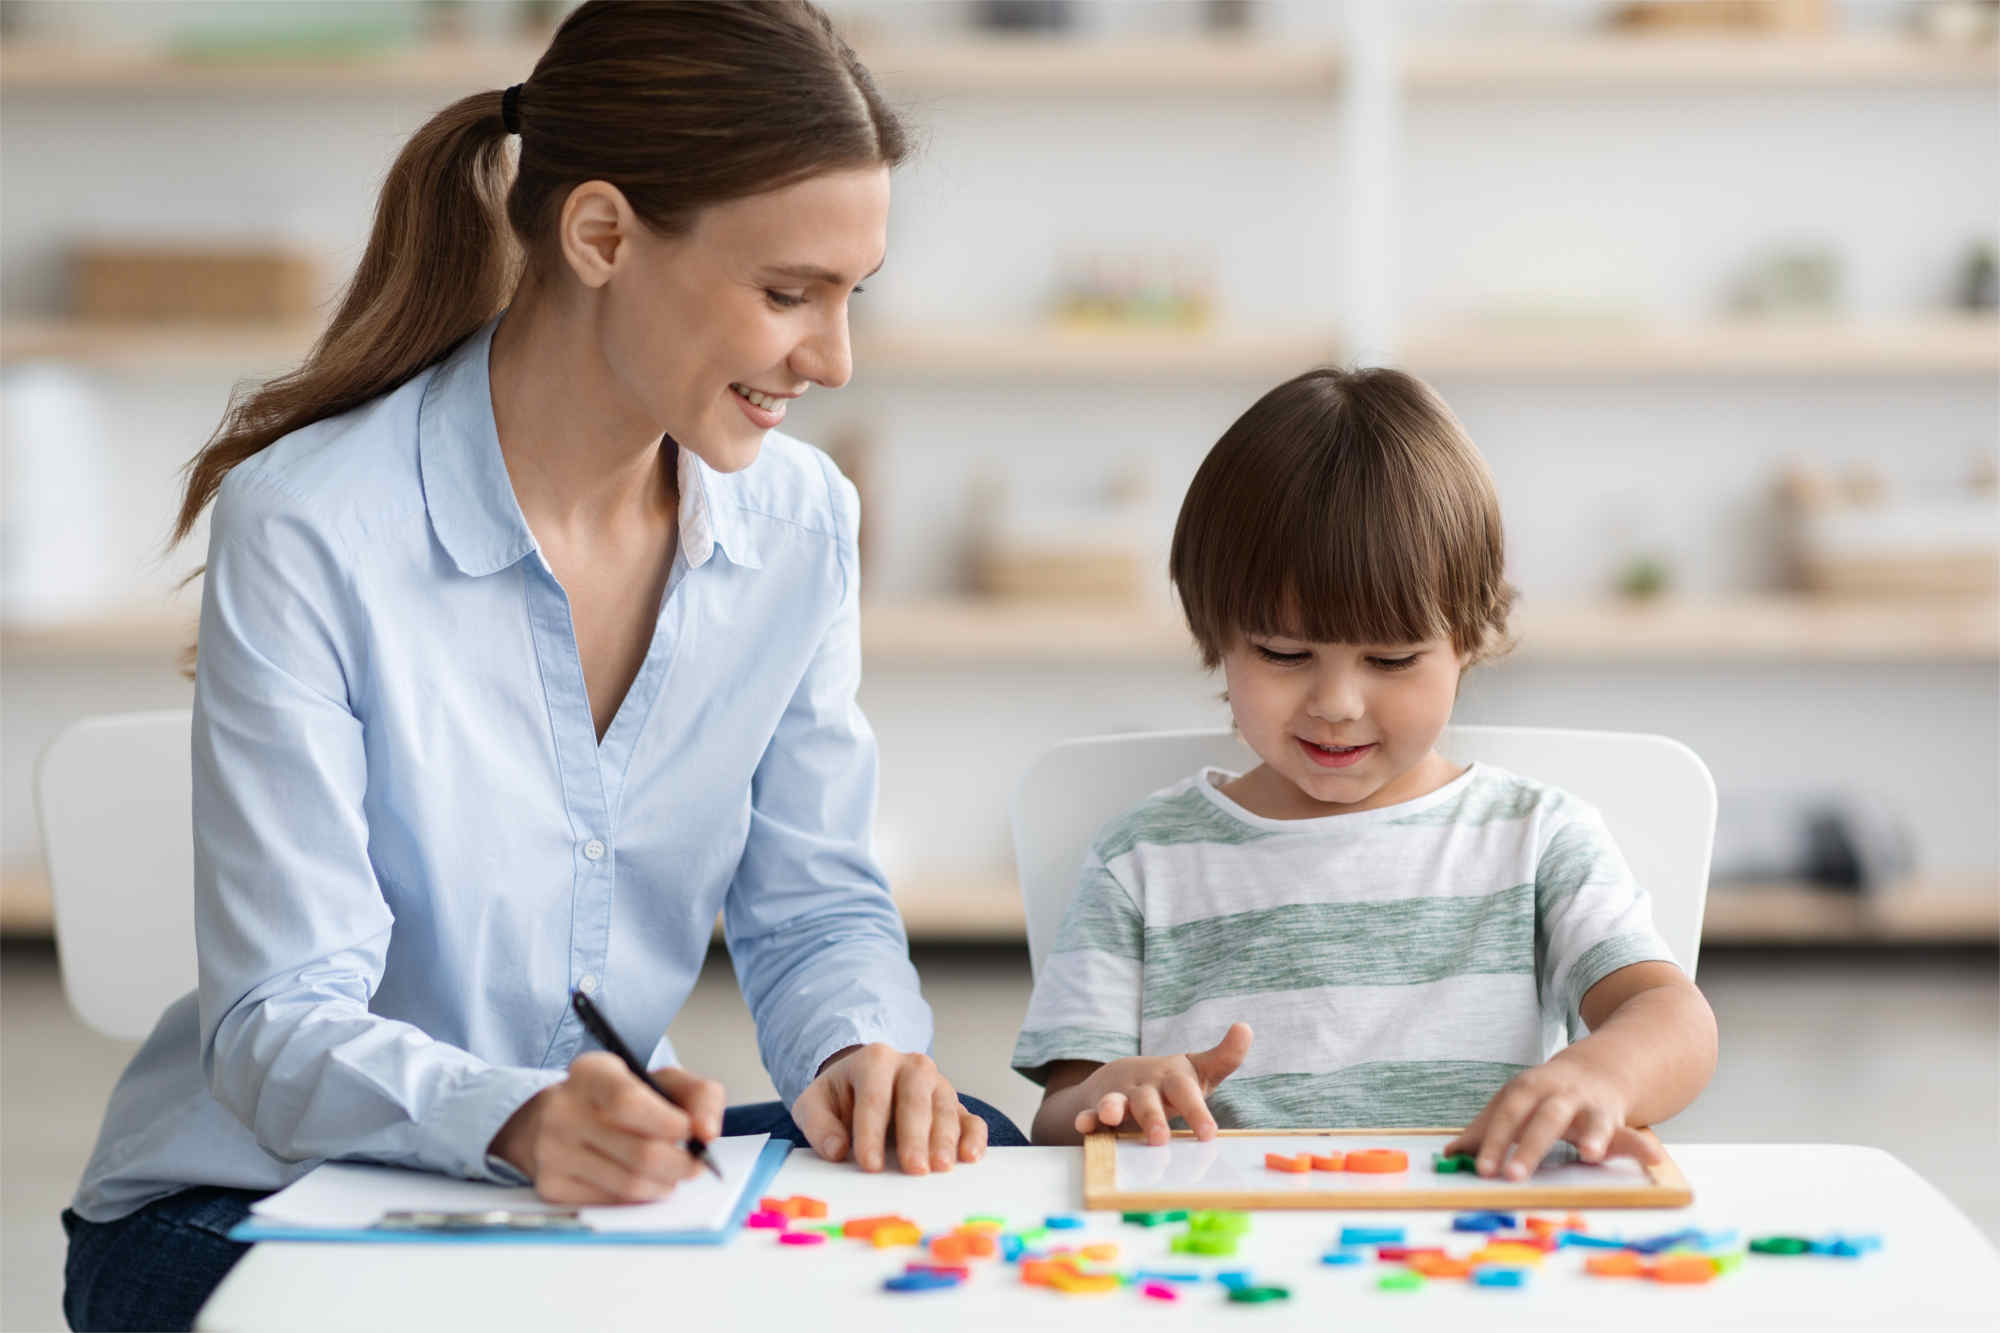 woman in blue shirt and child in green and white striped tee-shirt sitting at classroom desk  child is placing magnetic letters on small whiteboard on desk, woman is writing, both smiling and looking at whiteboard - Footsteps Educational Psychology Assessment and Intervention